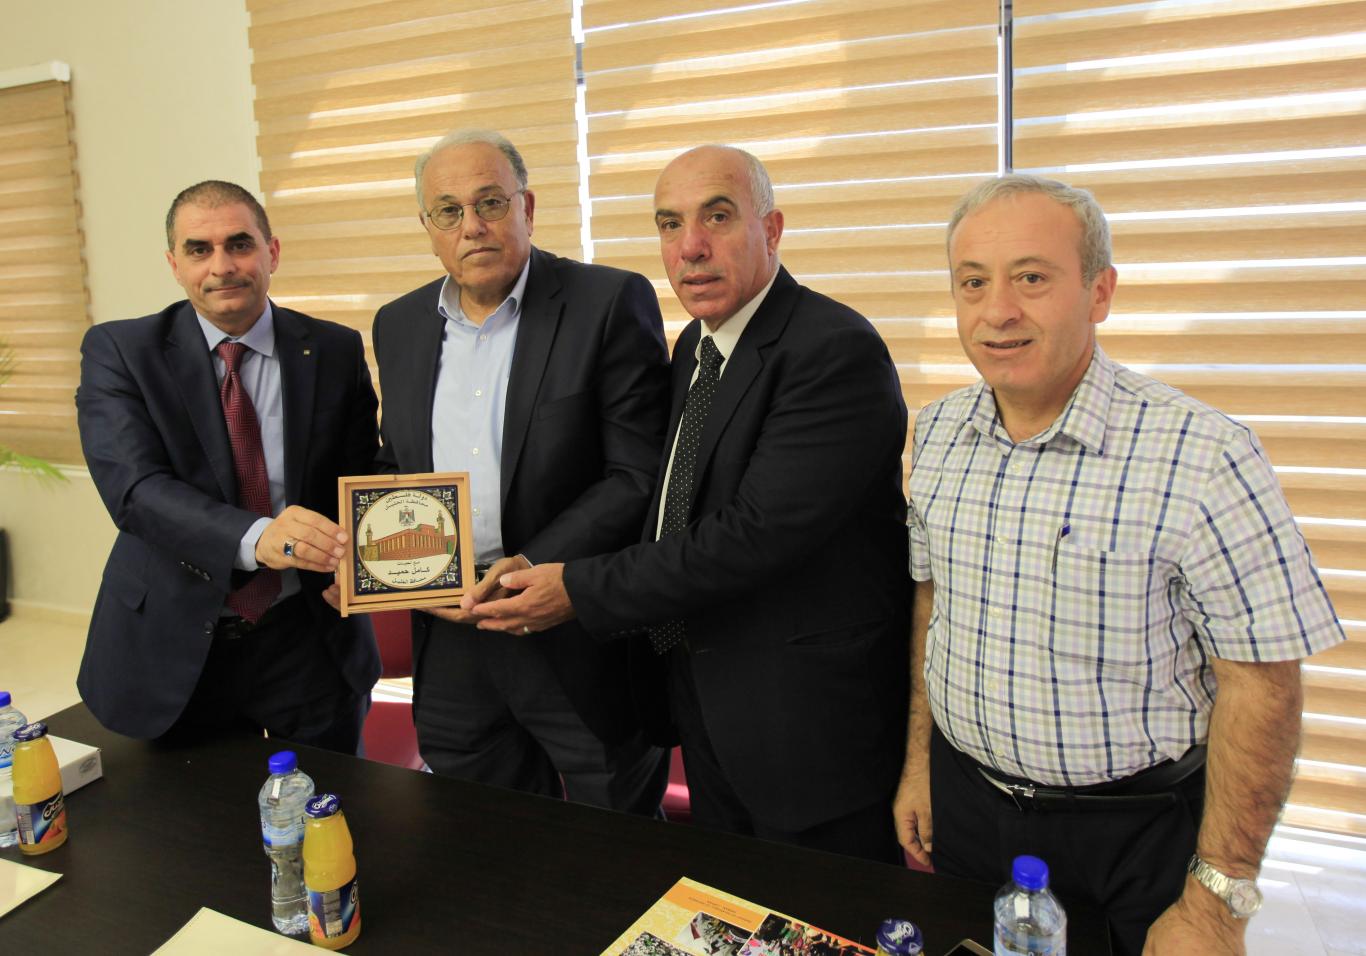 From the Palestinian Public Relations Forum visit